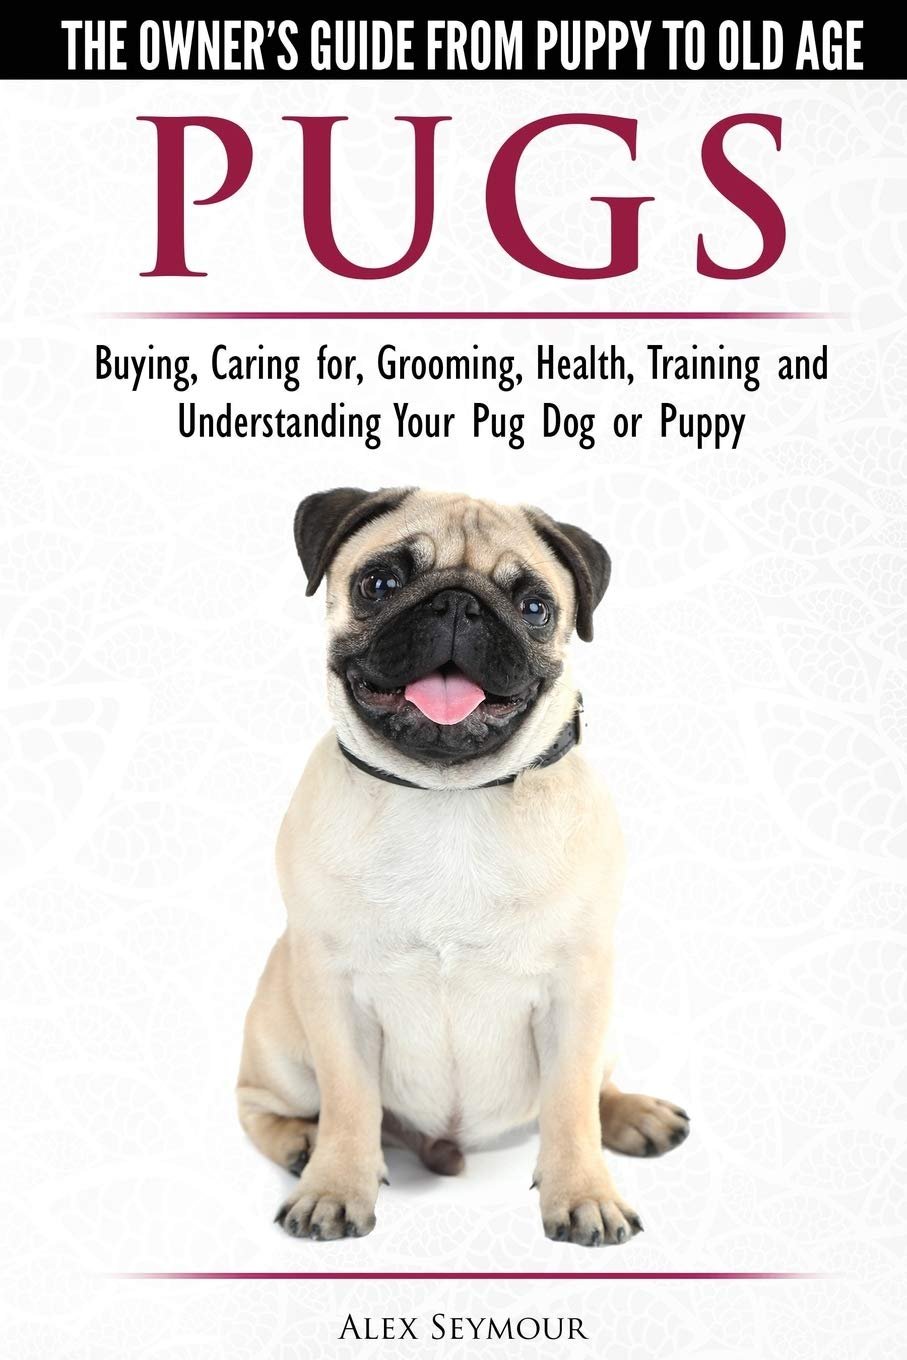 Pugs Owner’s Guide Review